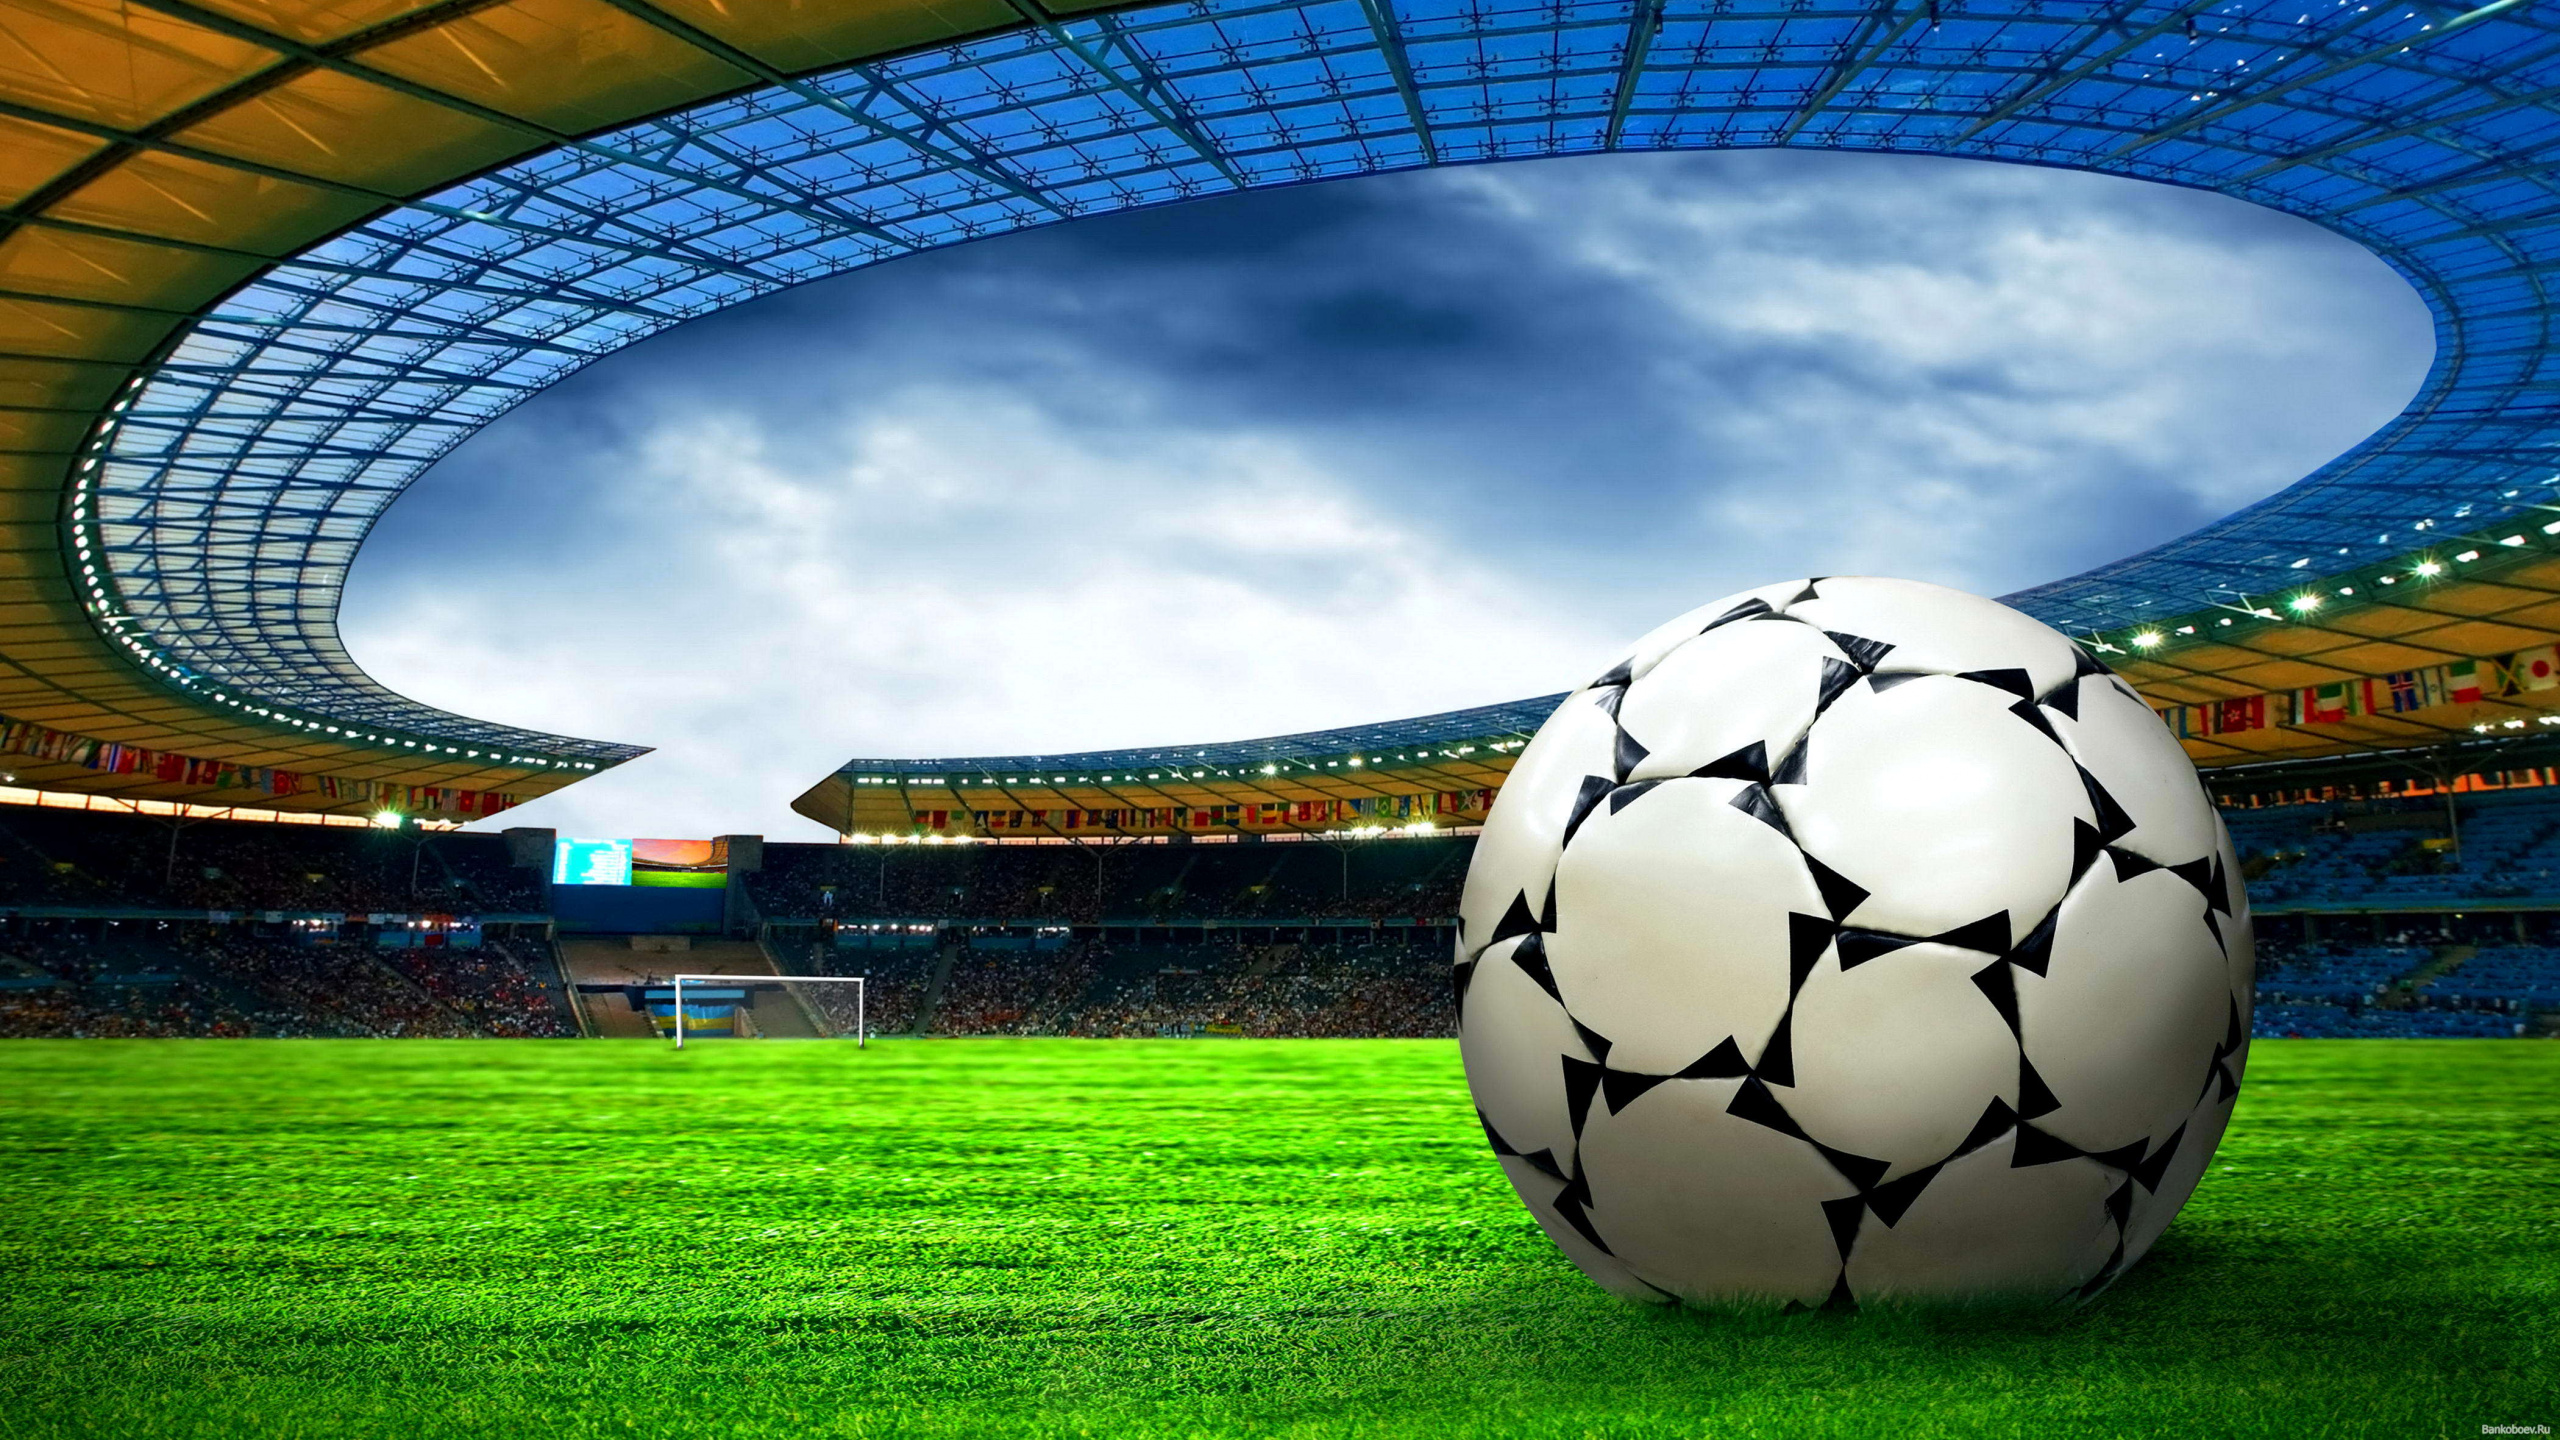 Soccer Ball on Green Grass Field Under White Clouds During Daytime. Wallpaper in 2560x1440 Resolution